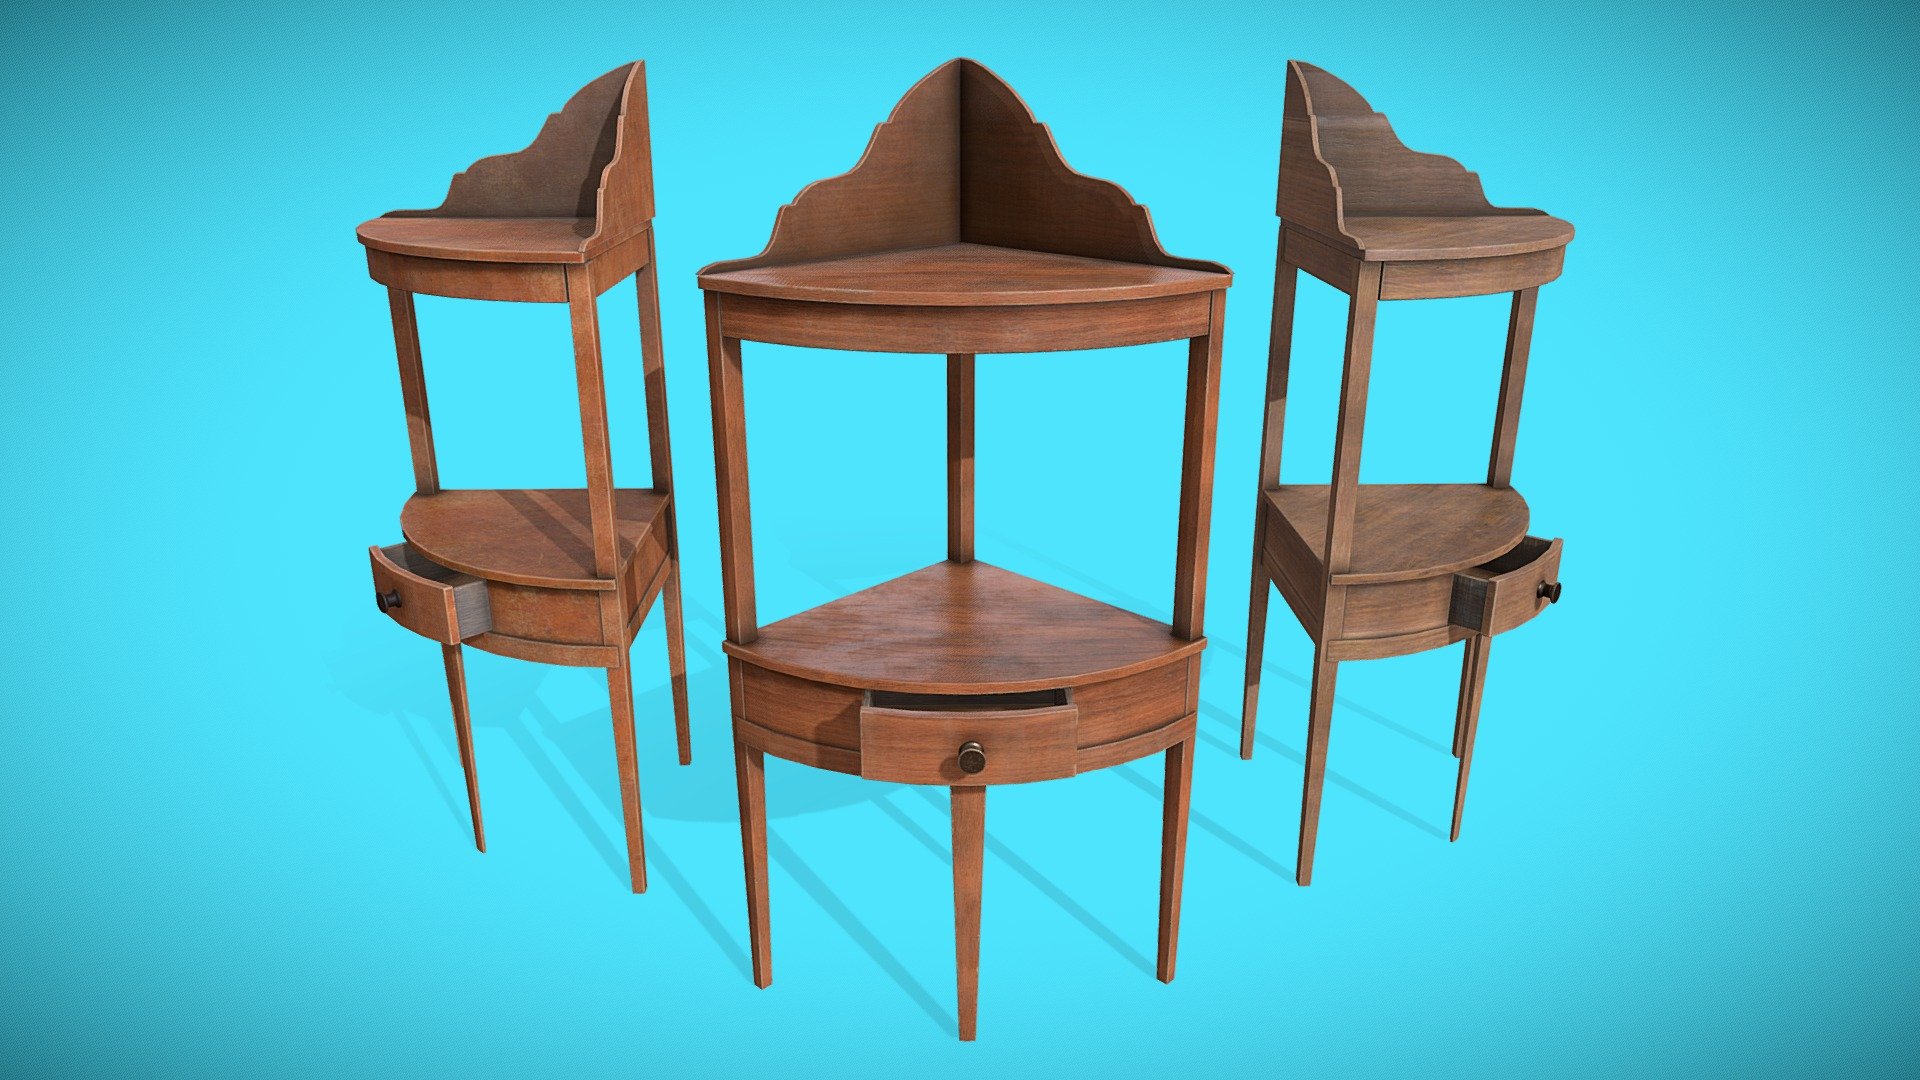 1800s Wooden corner shelving or corner table with a single drawer - with three texture variations 3d model